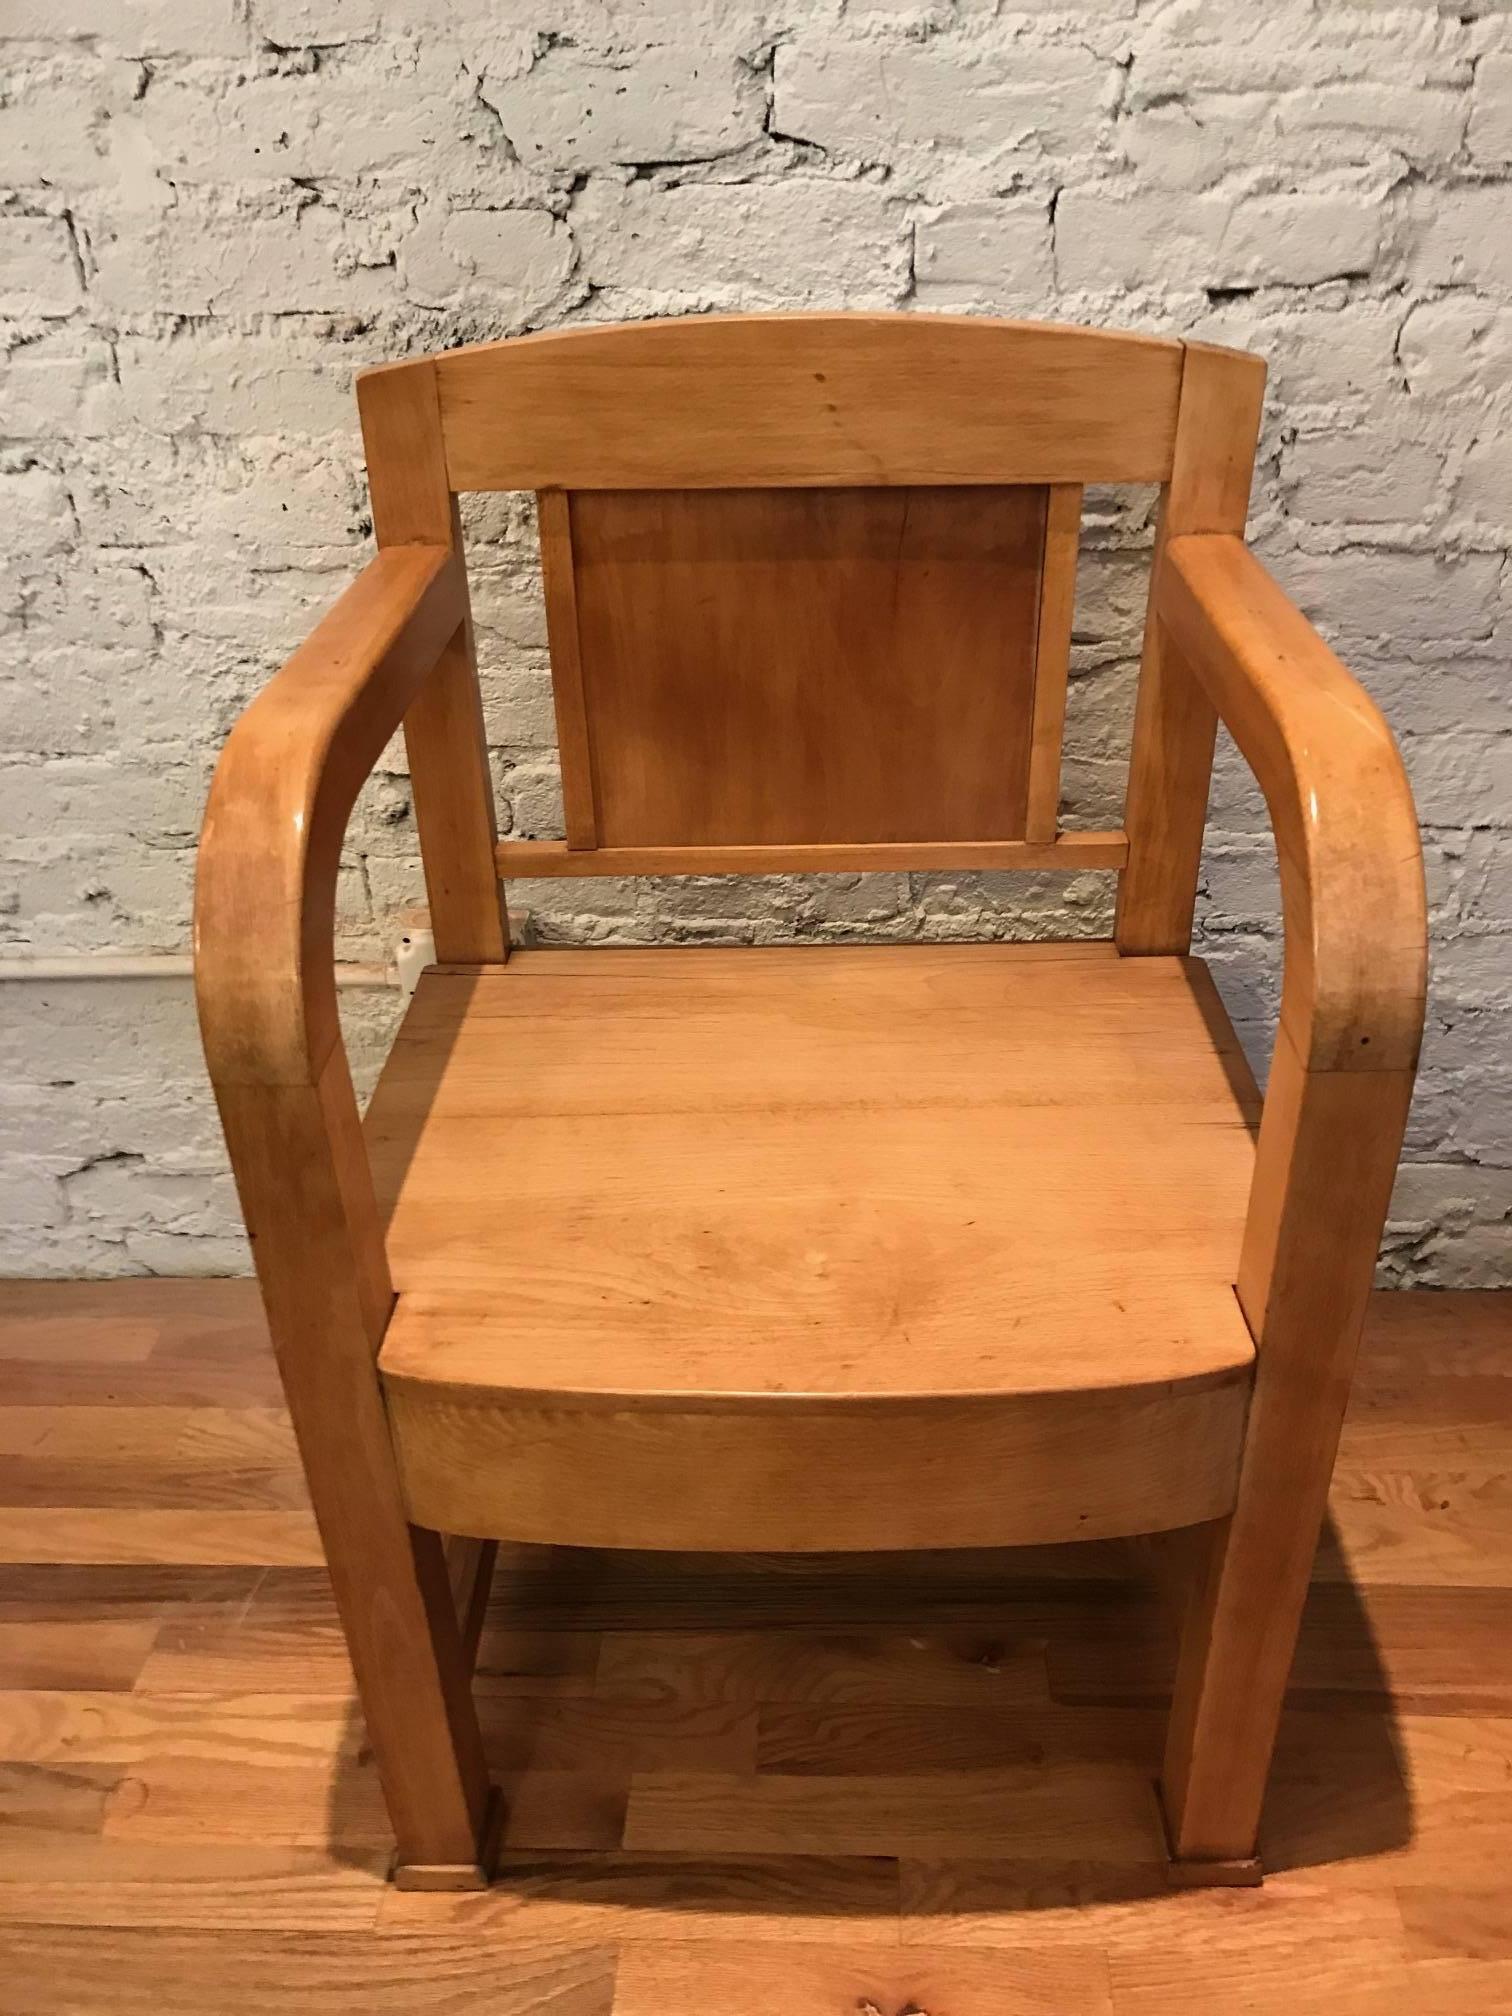 An early 20th century Austrian Viennese Secession maple armchair.
Fantastic bold modern profile.